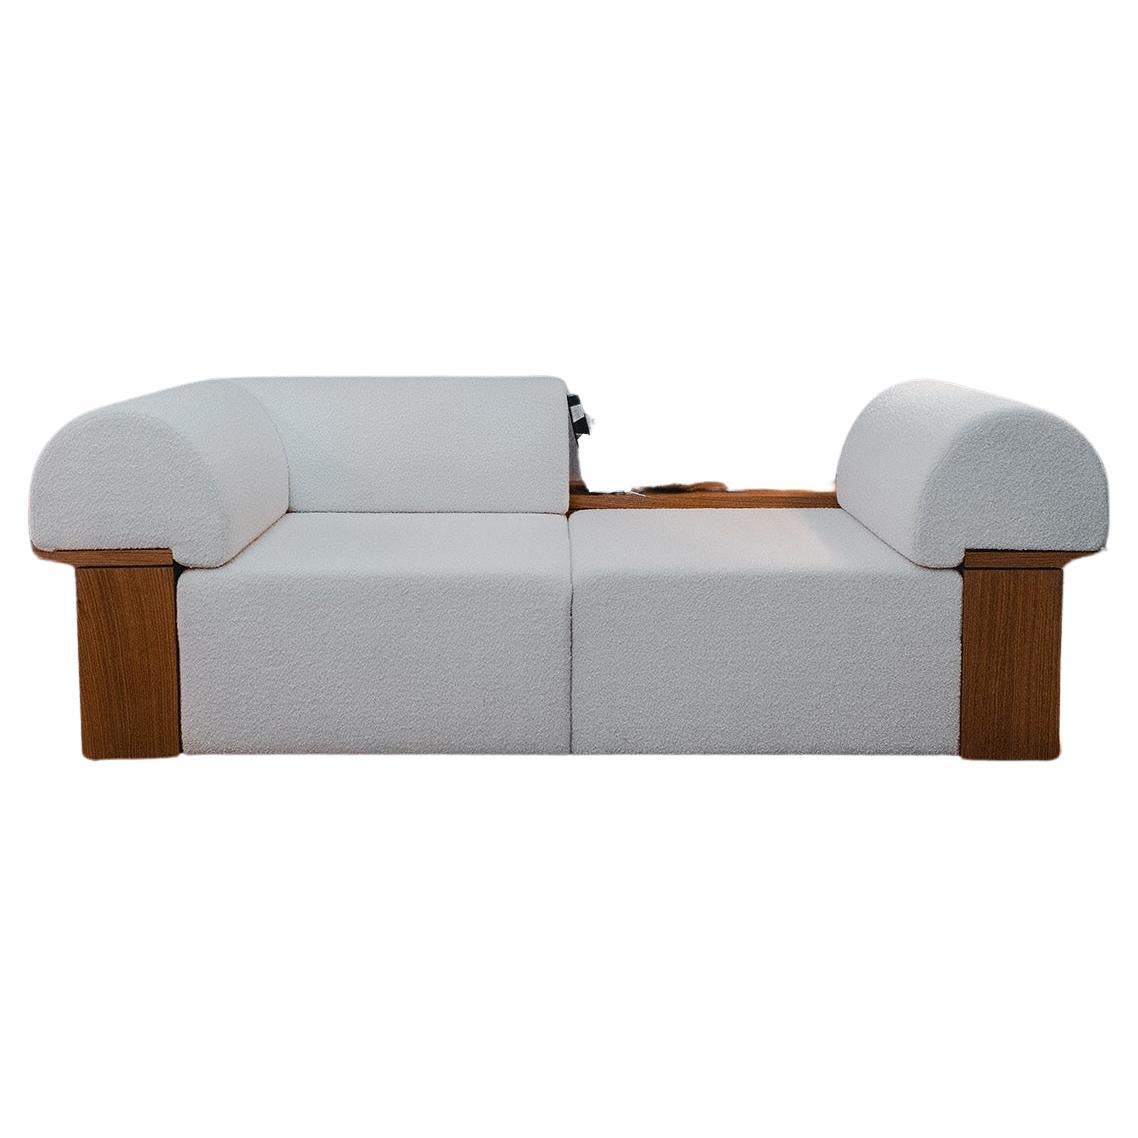 Wittorin sofa (2 modules), modular sofa in natural oak and boucle upholstery For Sale